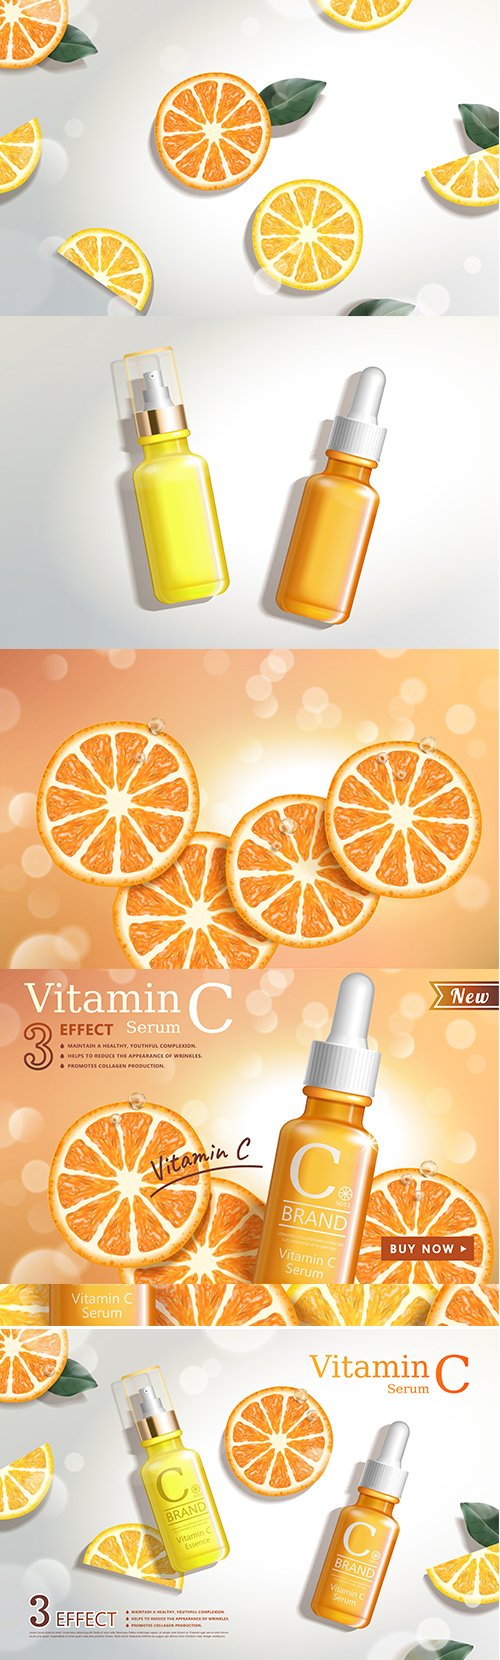 Vitamin c serum ads with refreshing citrus sections and droplet bottle